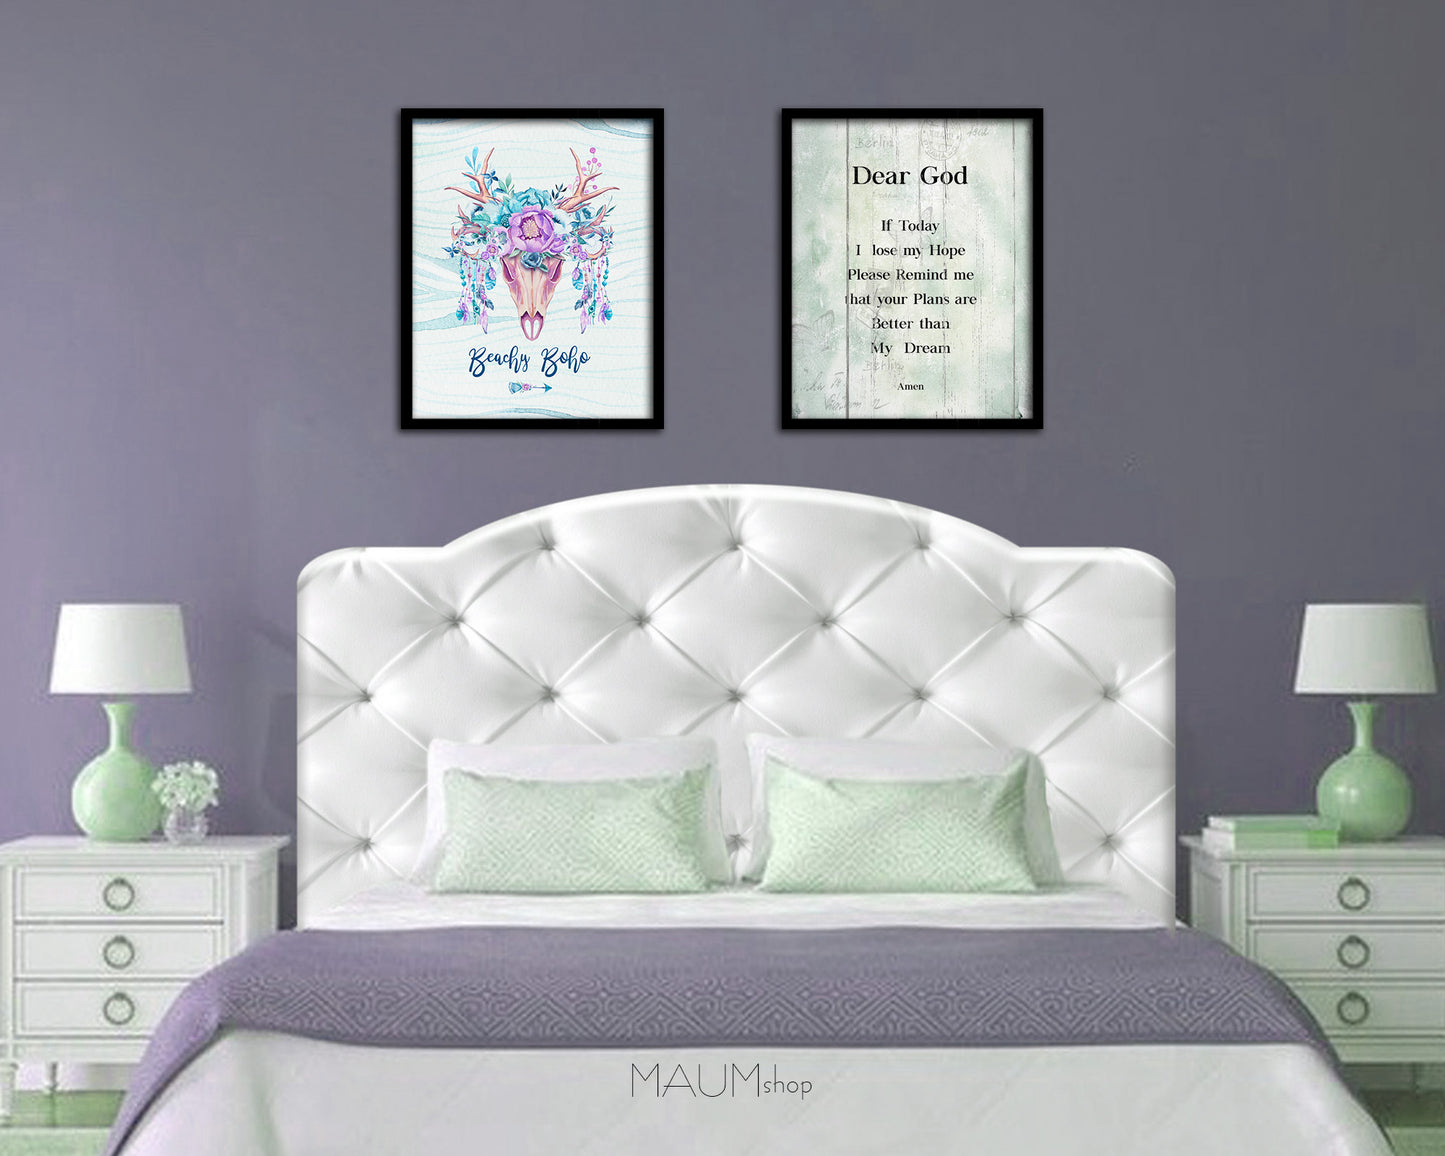 Dear God, if today I lose my hope please remind me Bible Verse Scripture Frame Print